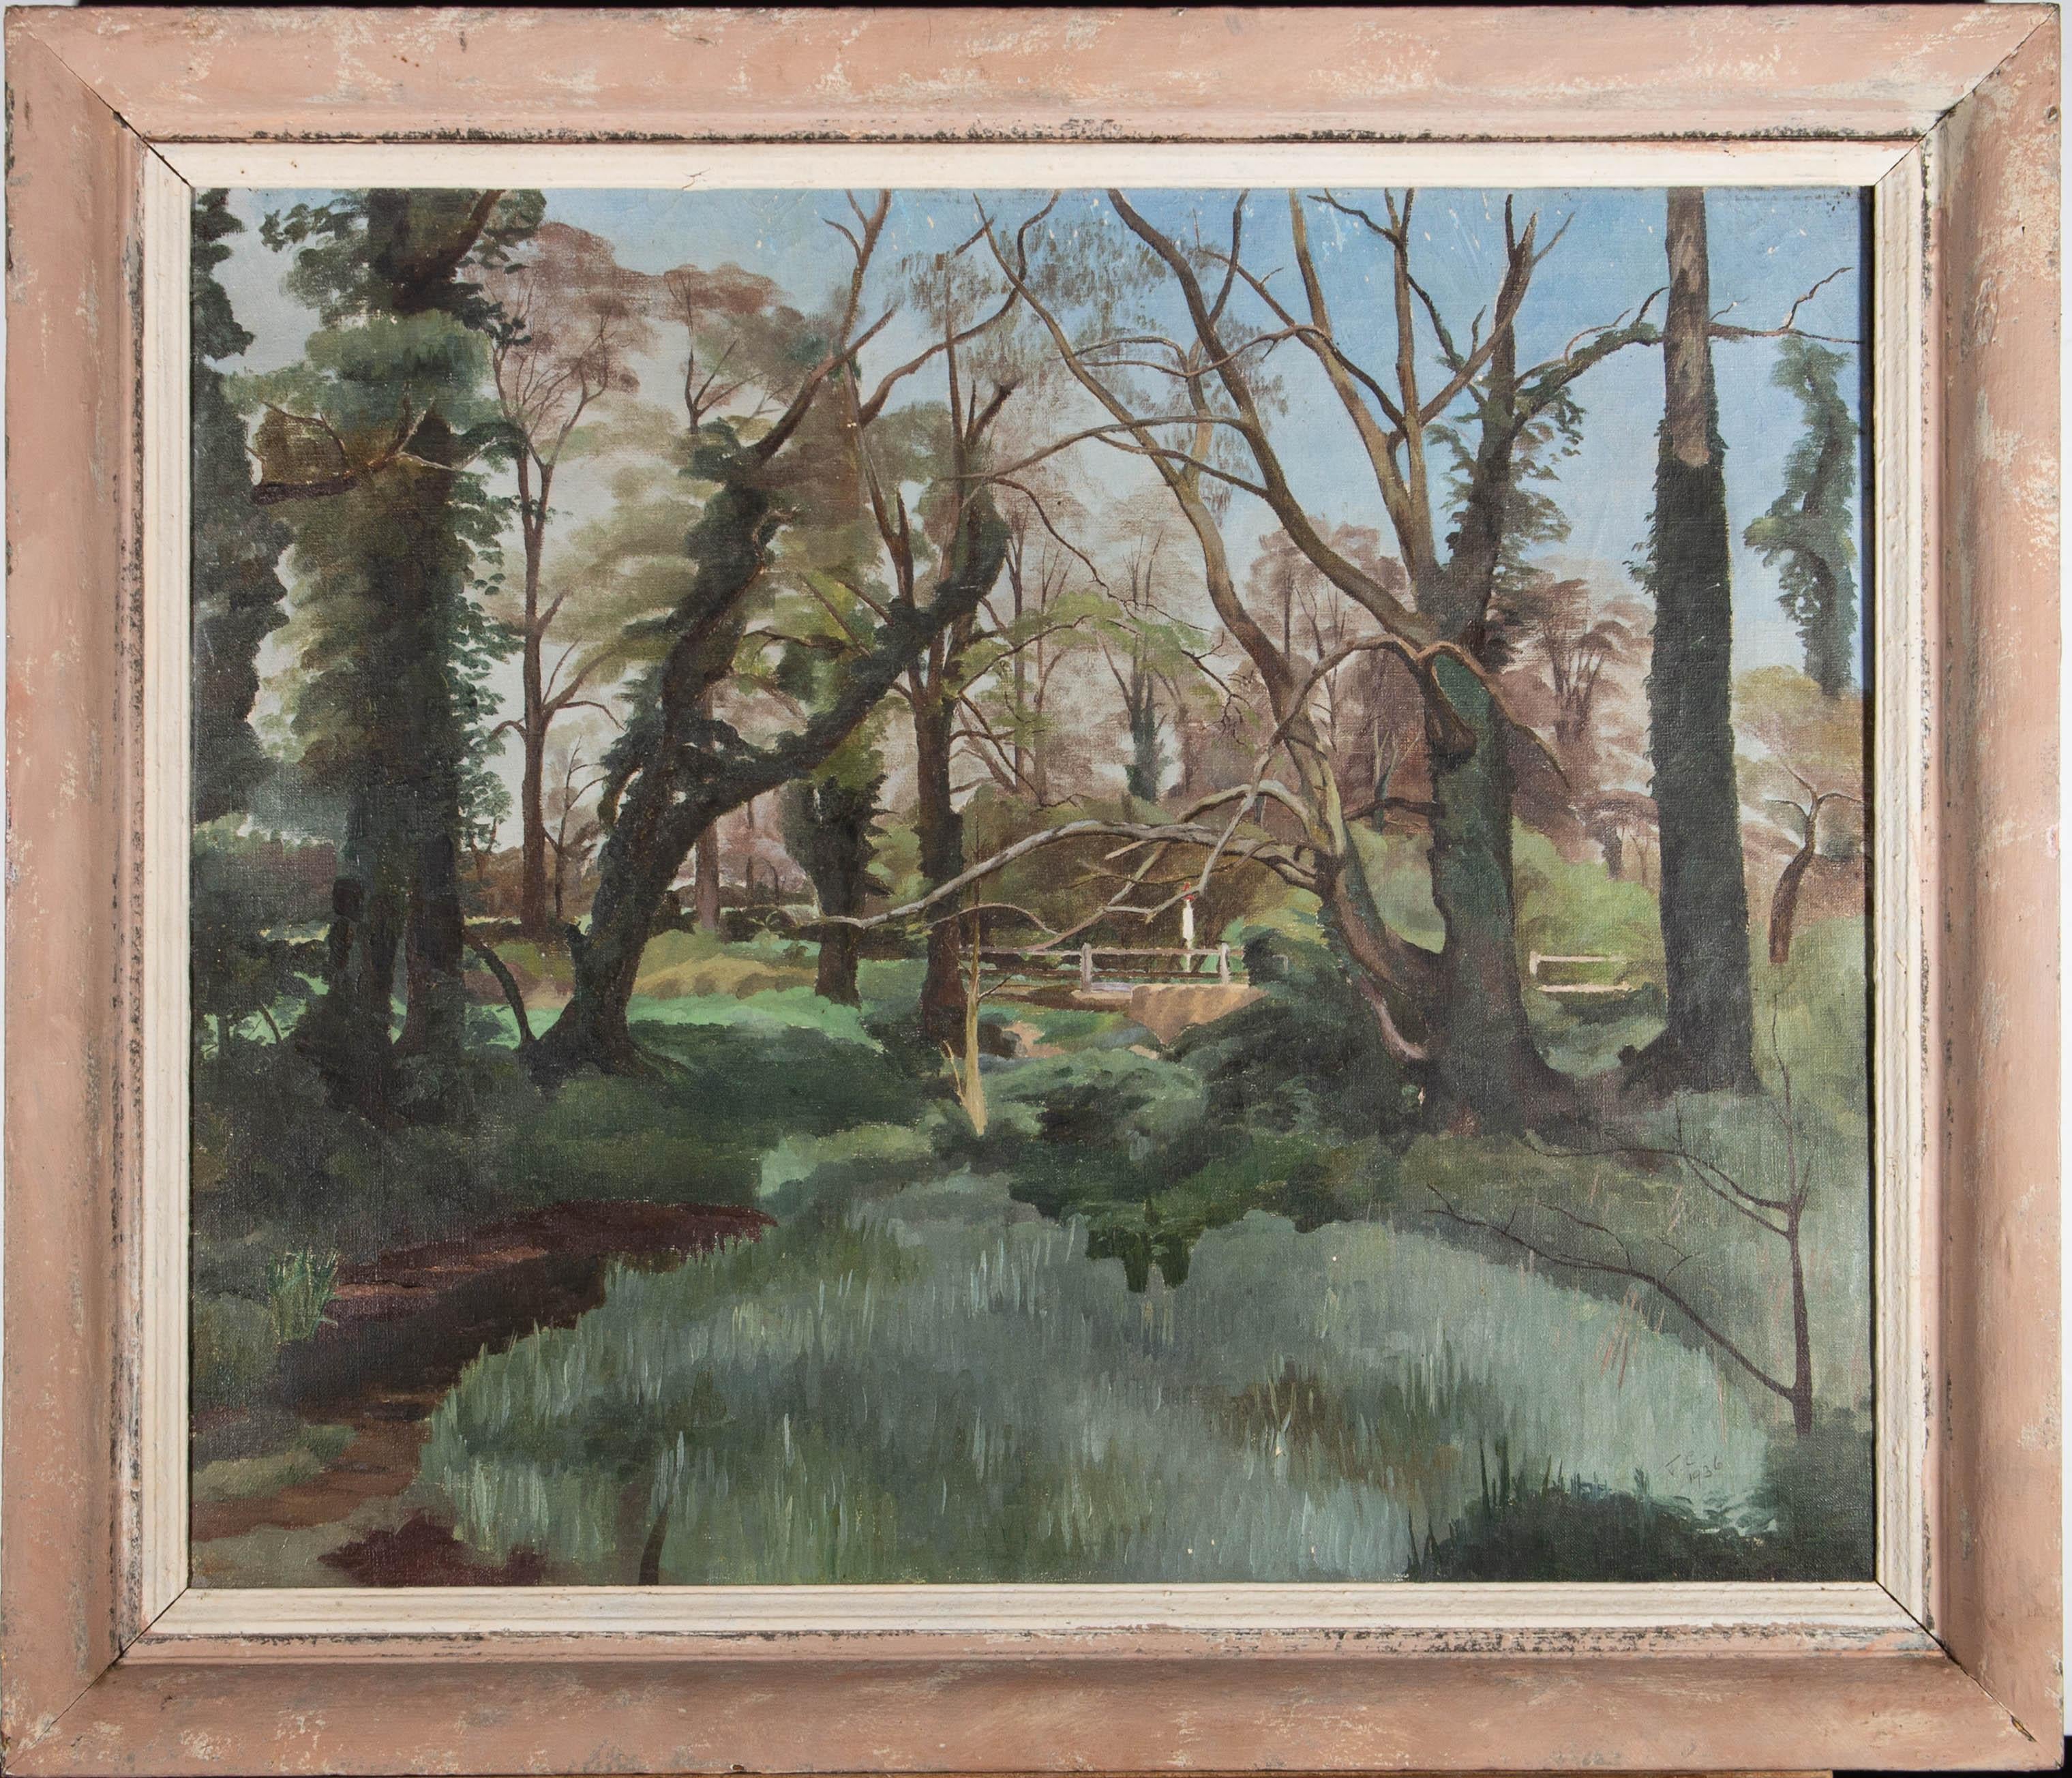 A fine and accomplished oil painting, depicting a woodland scene with a small wooden fence in the distance. The artist has used various shades of green and blue to create this thoughtful and harmonious composition. Monogrammed and dated to the lower